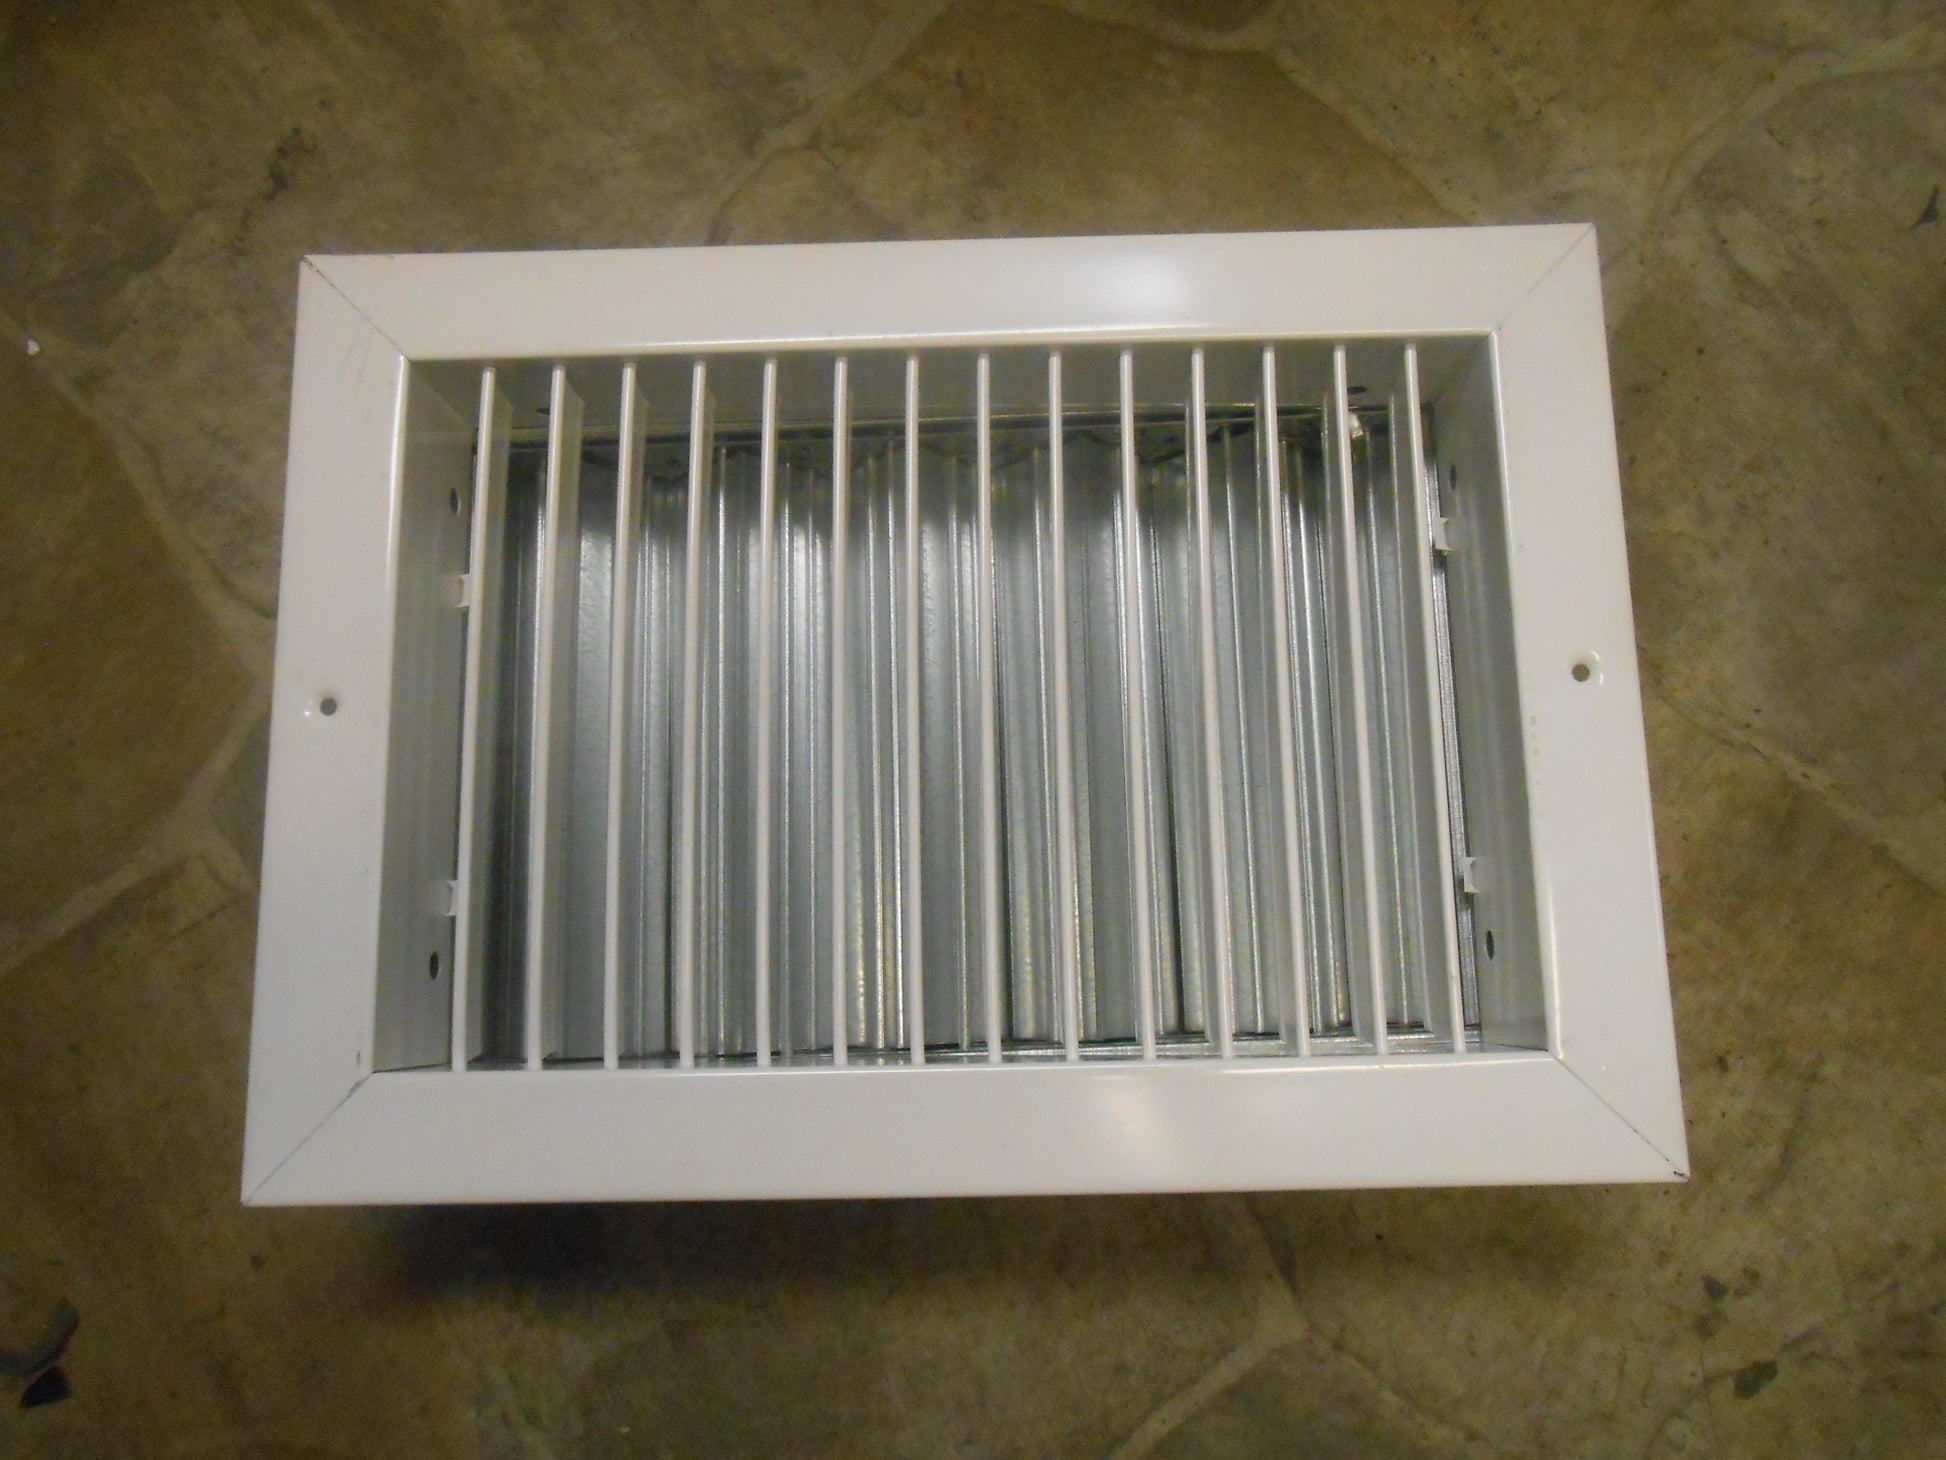 12 X 8 CEILING/WALL REGISTER WITH ADJUSTABLE LOUVERS